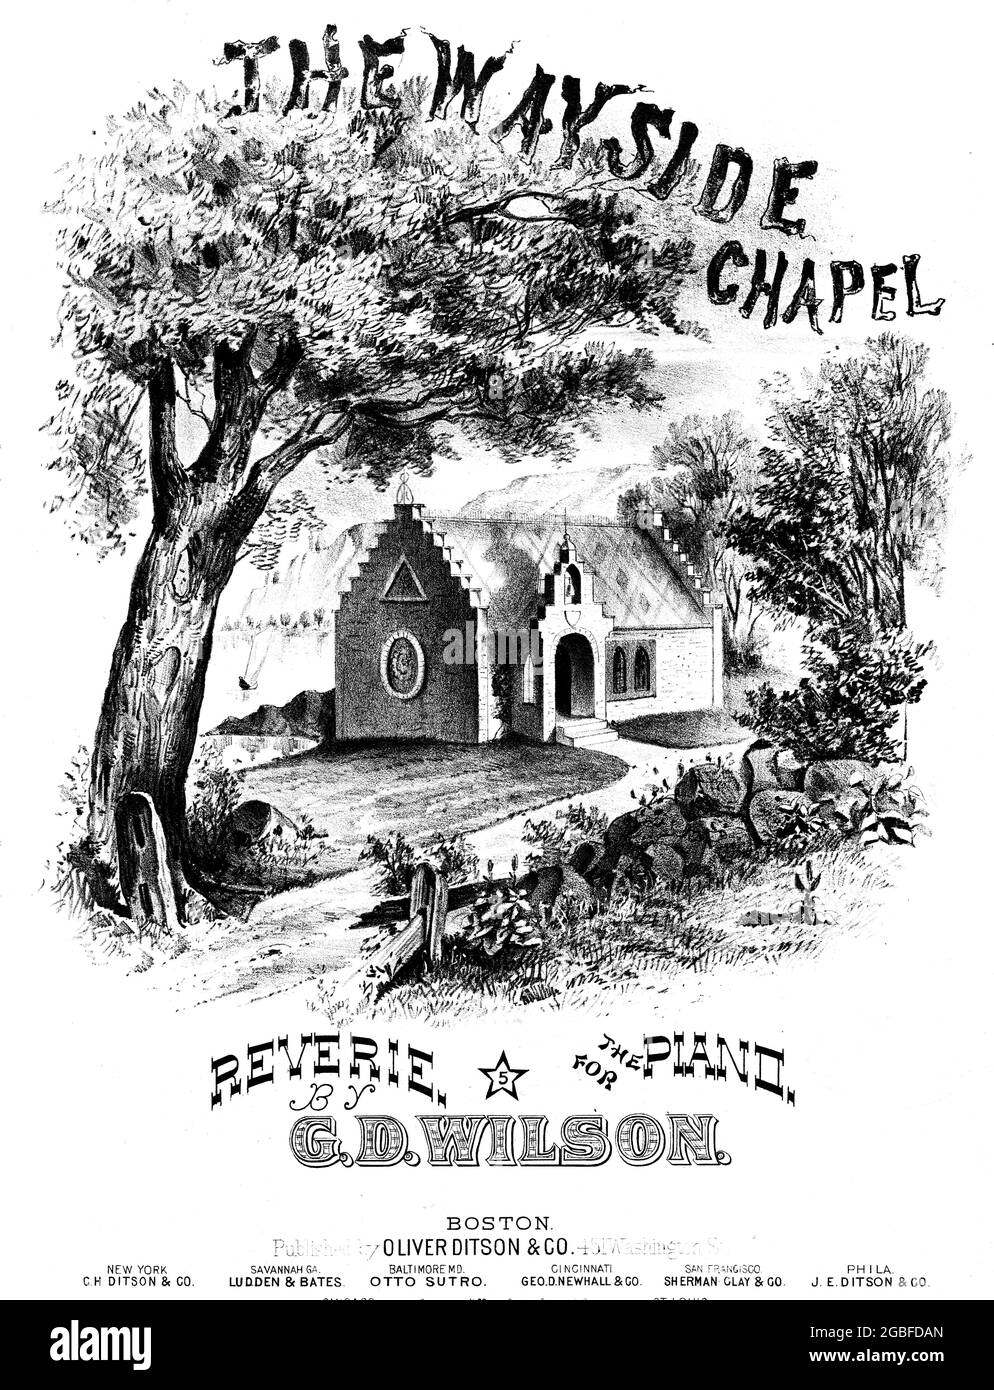 The Wayside Chapel, 1875 sheet music featuring b/w lithograph of a rural scene with a small chapel building. Stock Photo